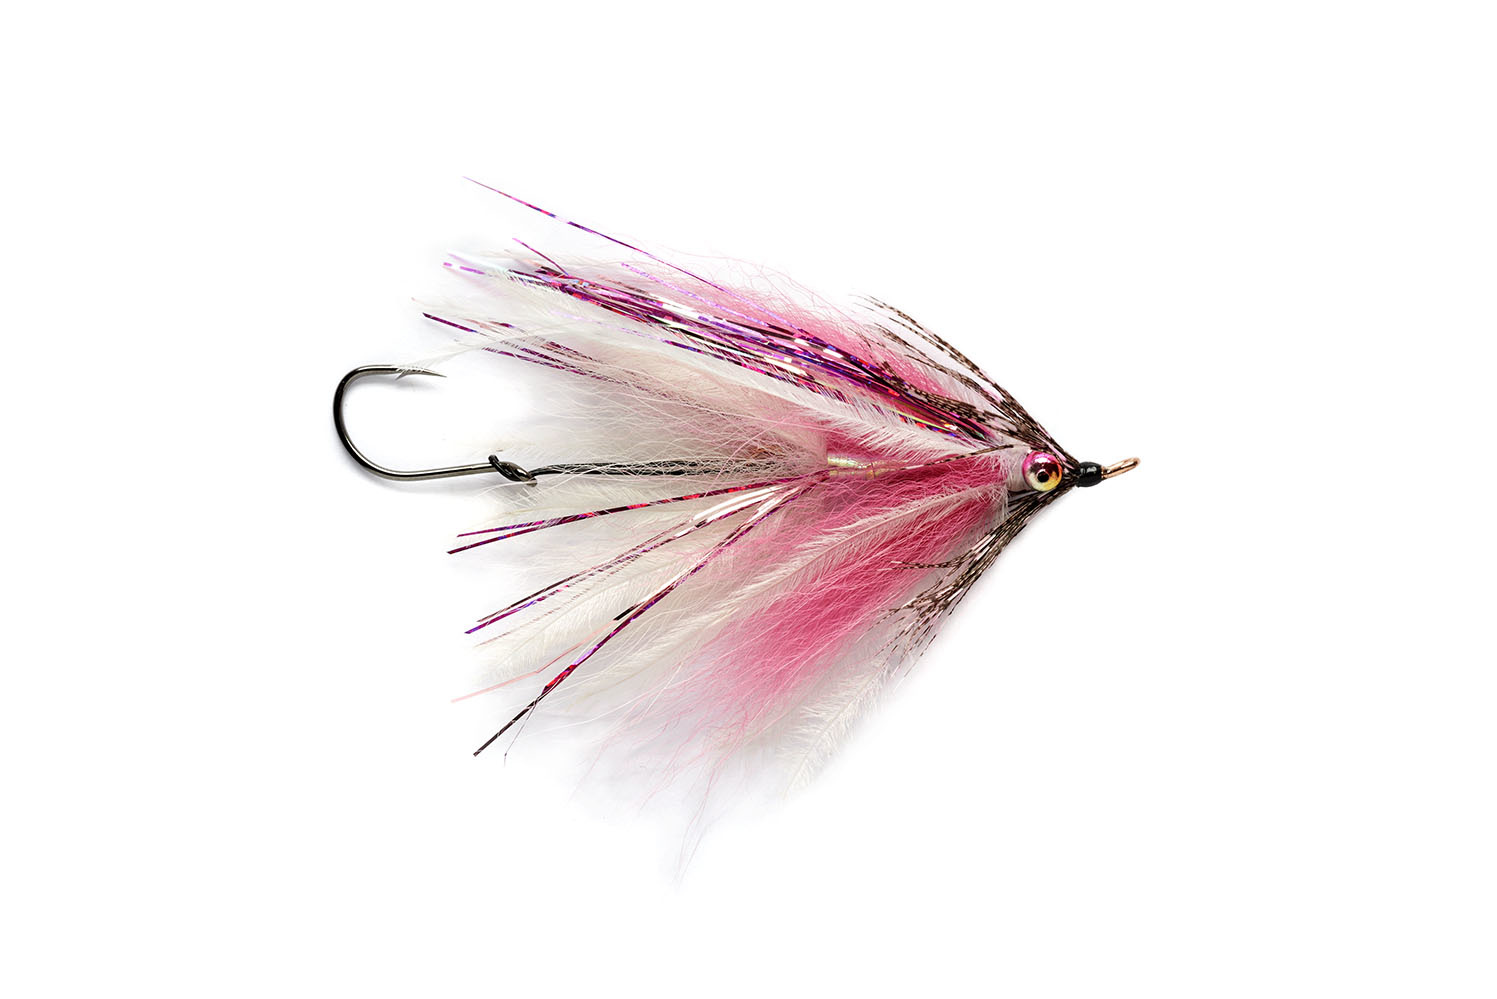 BF4 Bait Rig - 4 (size 15) hooks with hot pink/white nylon feathers 